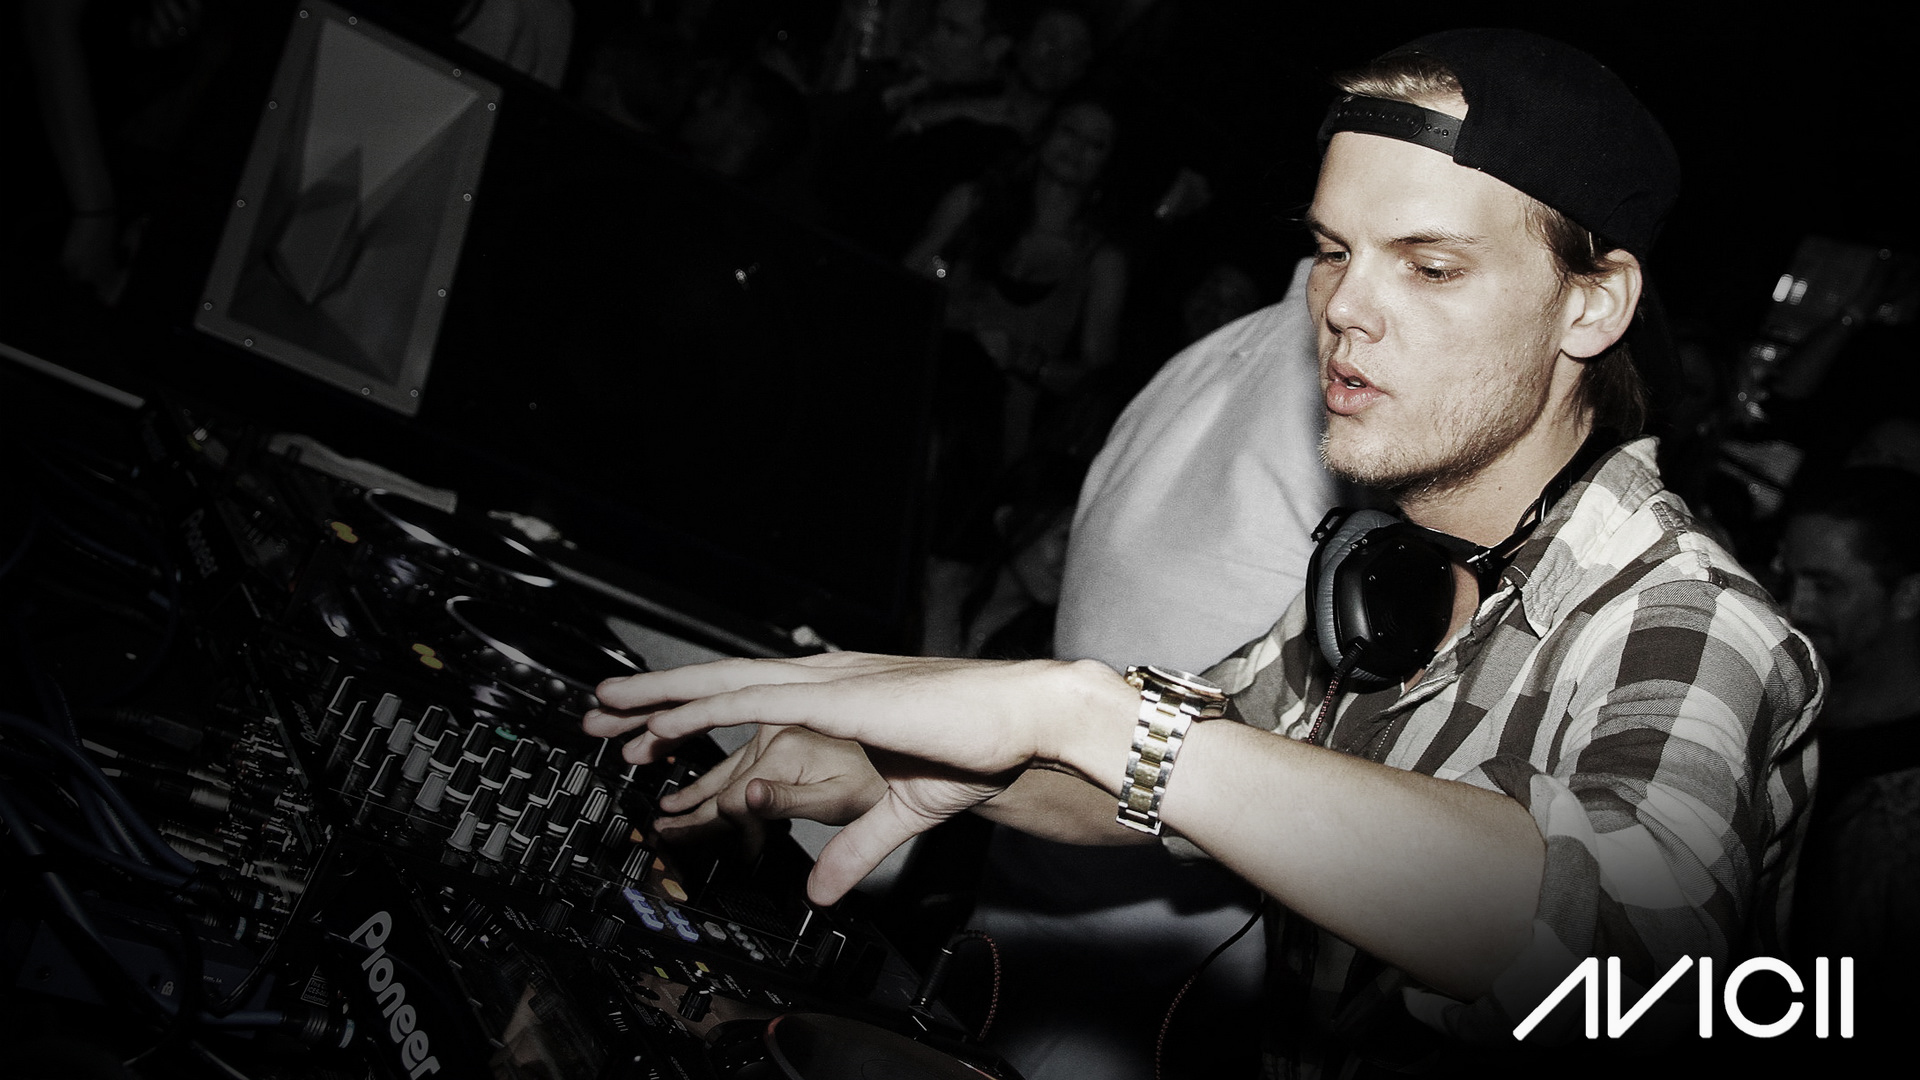 Dj Avicii Wallpaper Gallery Yopriceville High Quality Free Images And Transparent Png Clipart